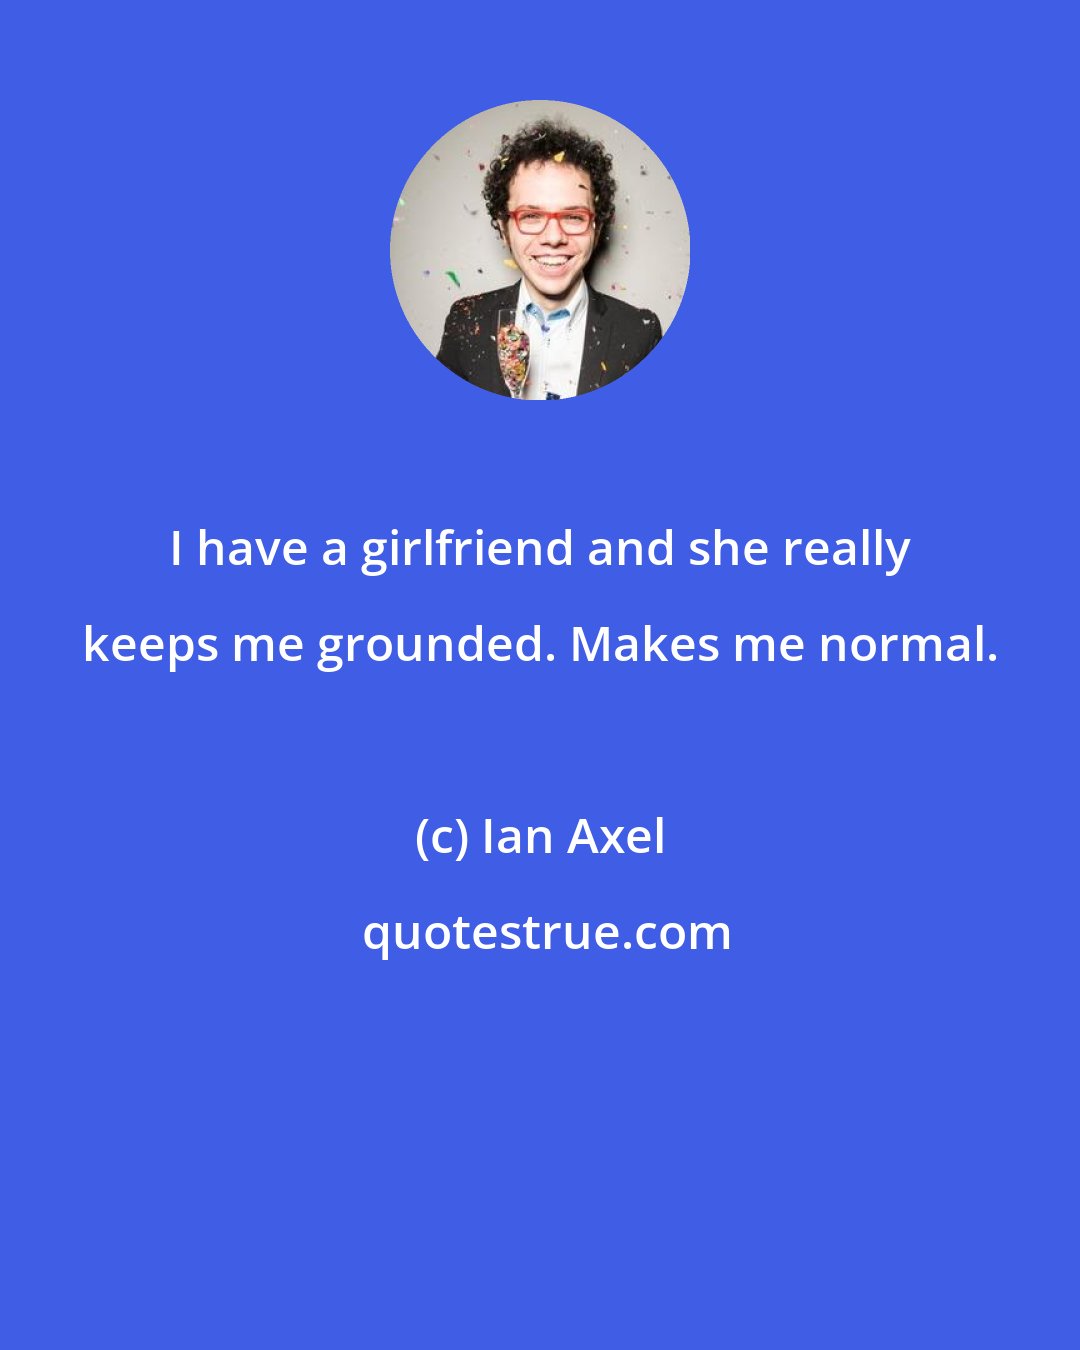 Ian Axel: I have a girlfriend and she really keeps me grounded. Makes me normal.